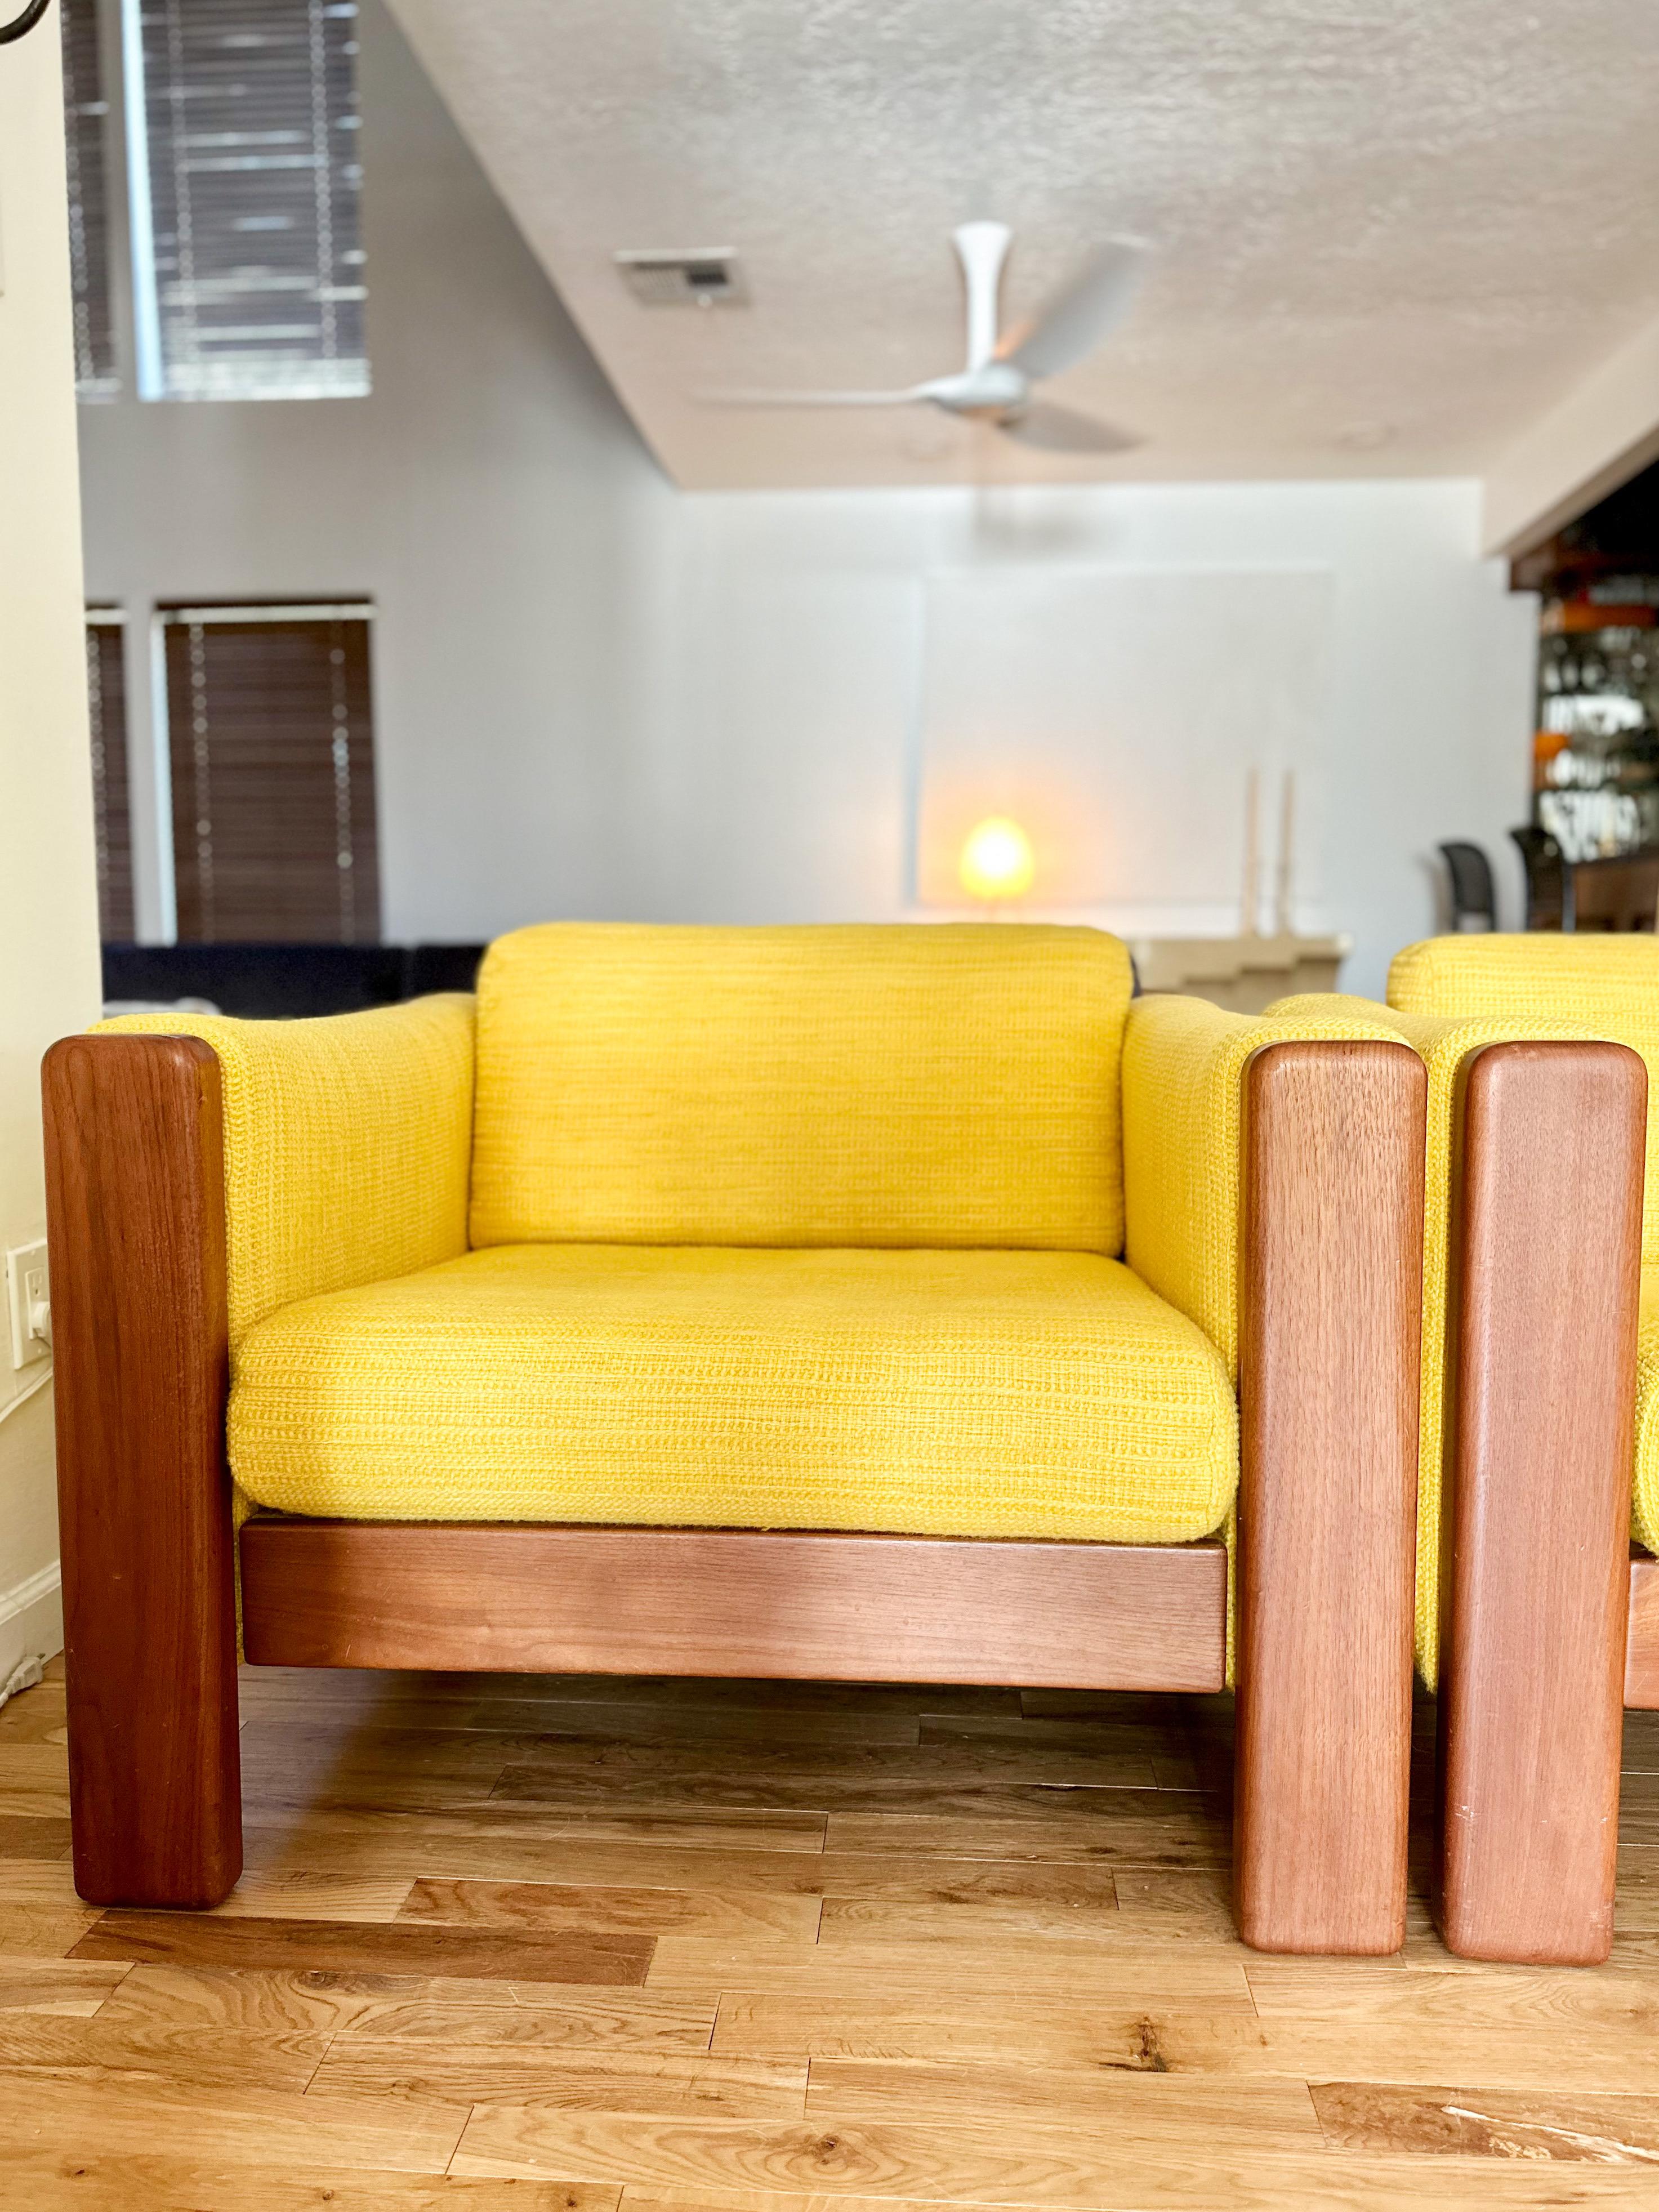 A rare opportunity to own bright pair of cube chairs with oak frames and sunny yellow wool all over, designed by Jim Eldon for Knoll c.1974. These big boys are all about Danish modern design with clean and minimal lines. Upholstery is all but